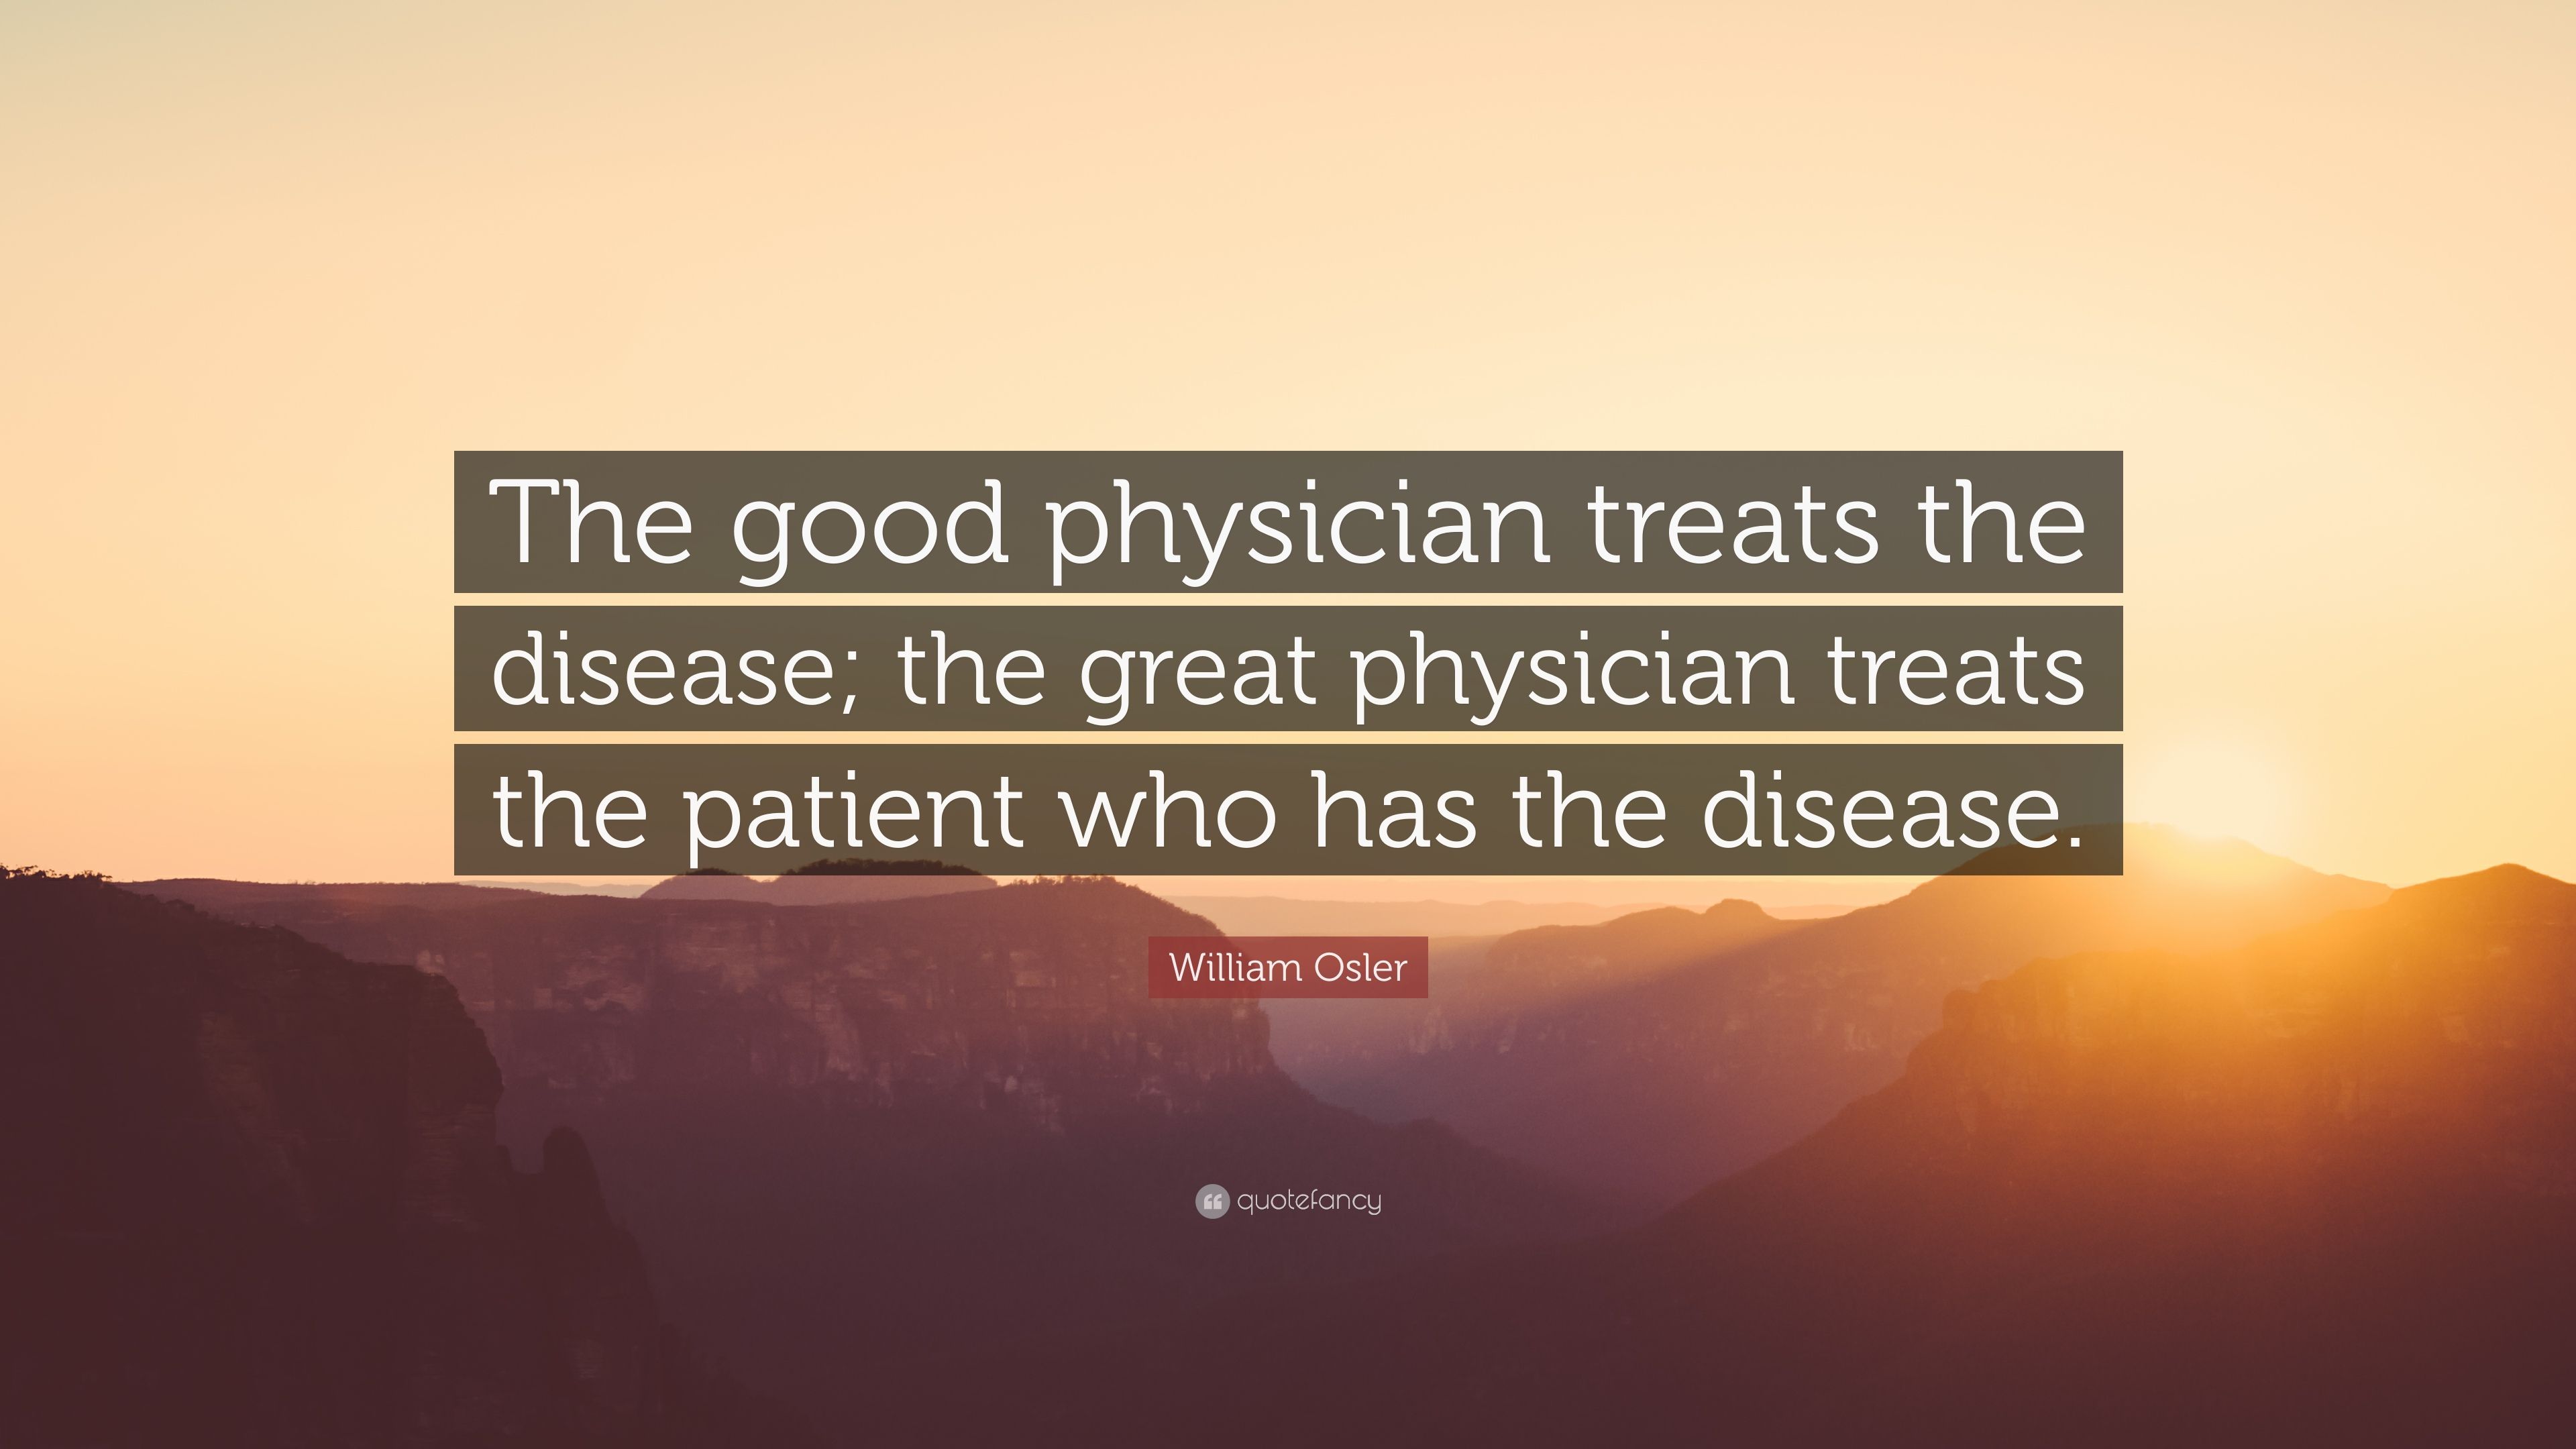 William Osler Quote: “The good physician treats the disease;